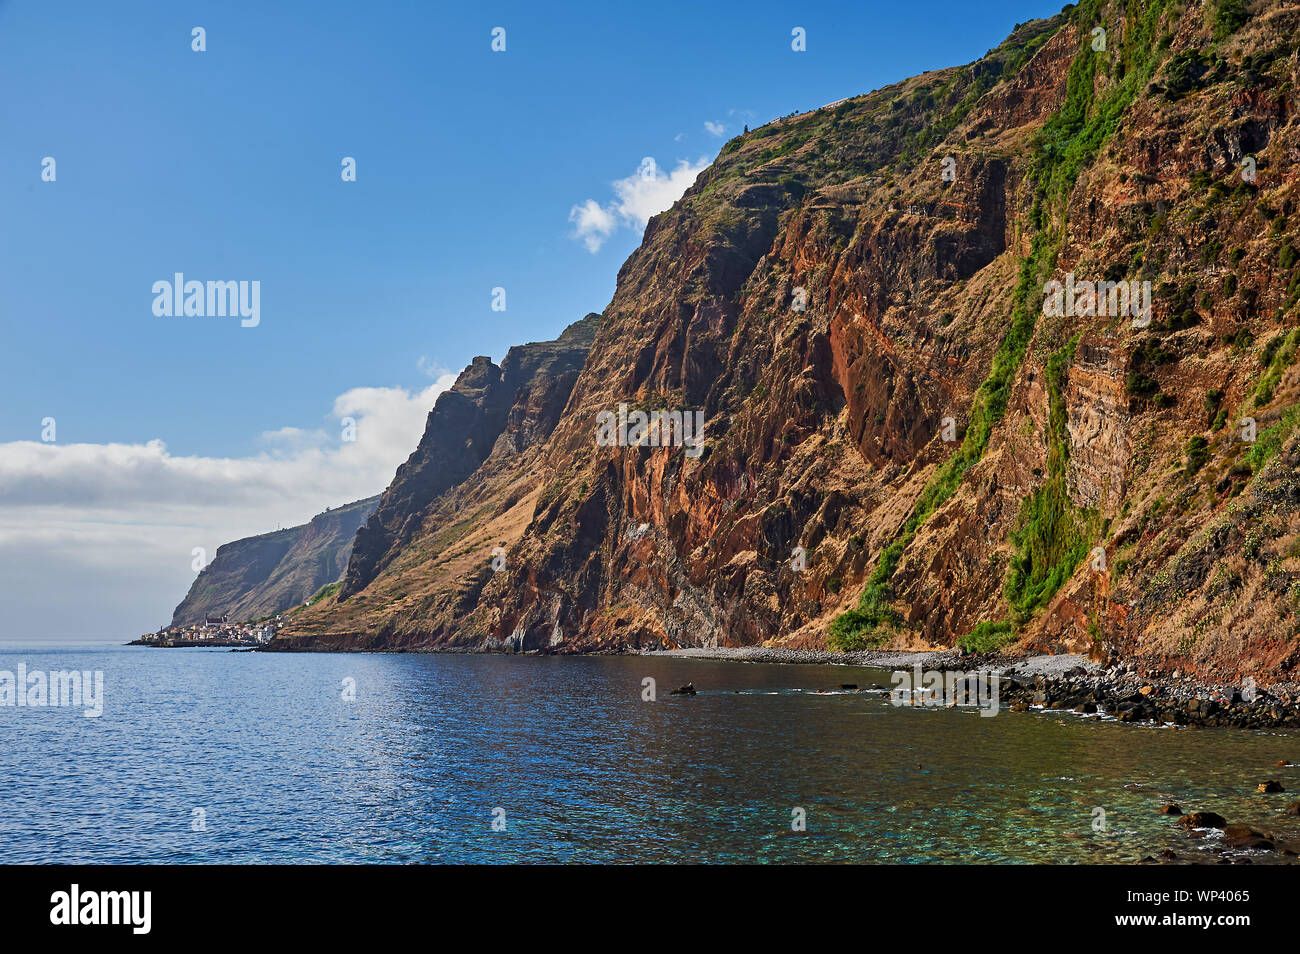 The southern coastline of the island of Madeira includes isolated villages at the foot of extensive sea cliffs. Stock Photo